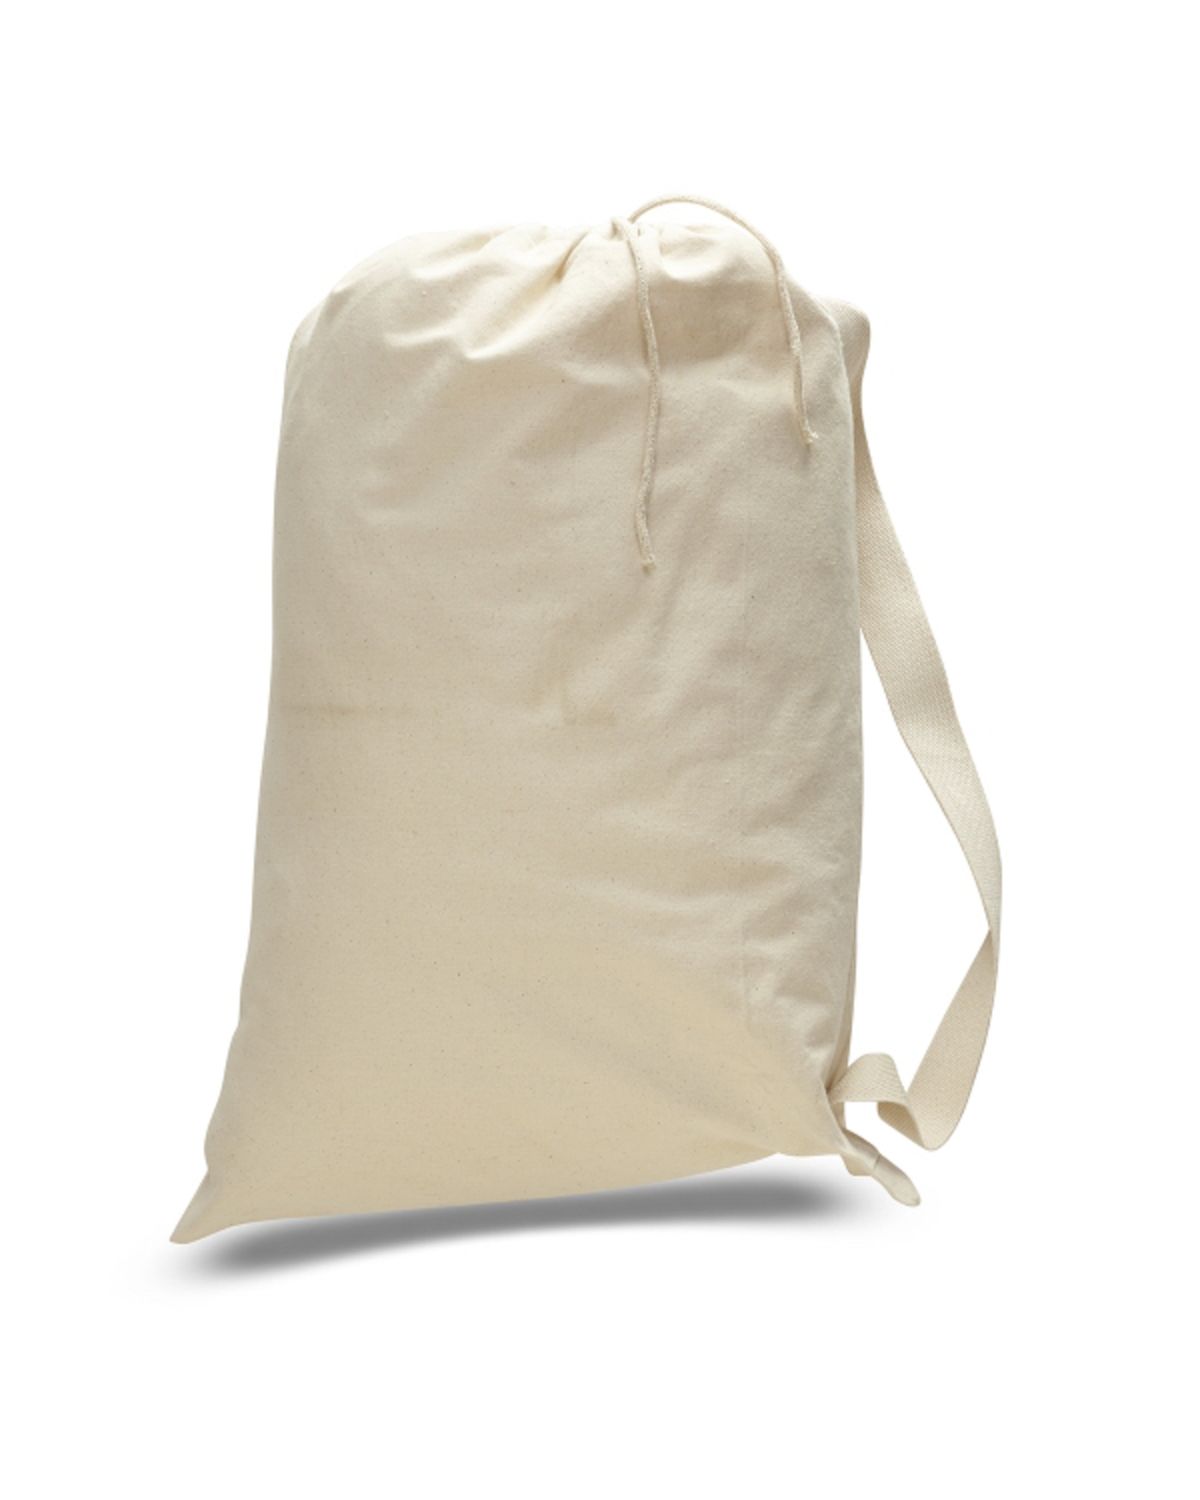 'OAD OAD110 Cotton Canvas Large Laundry Bag'